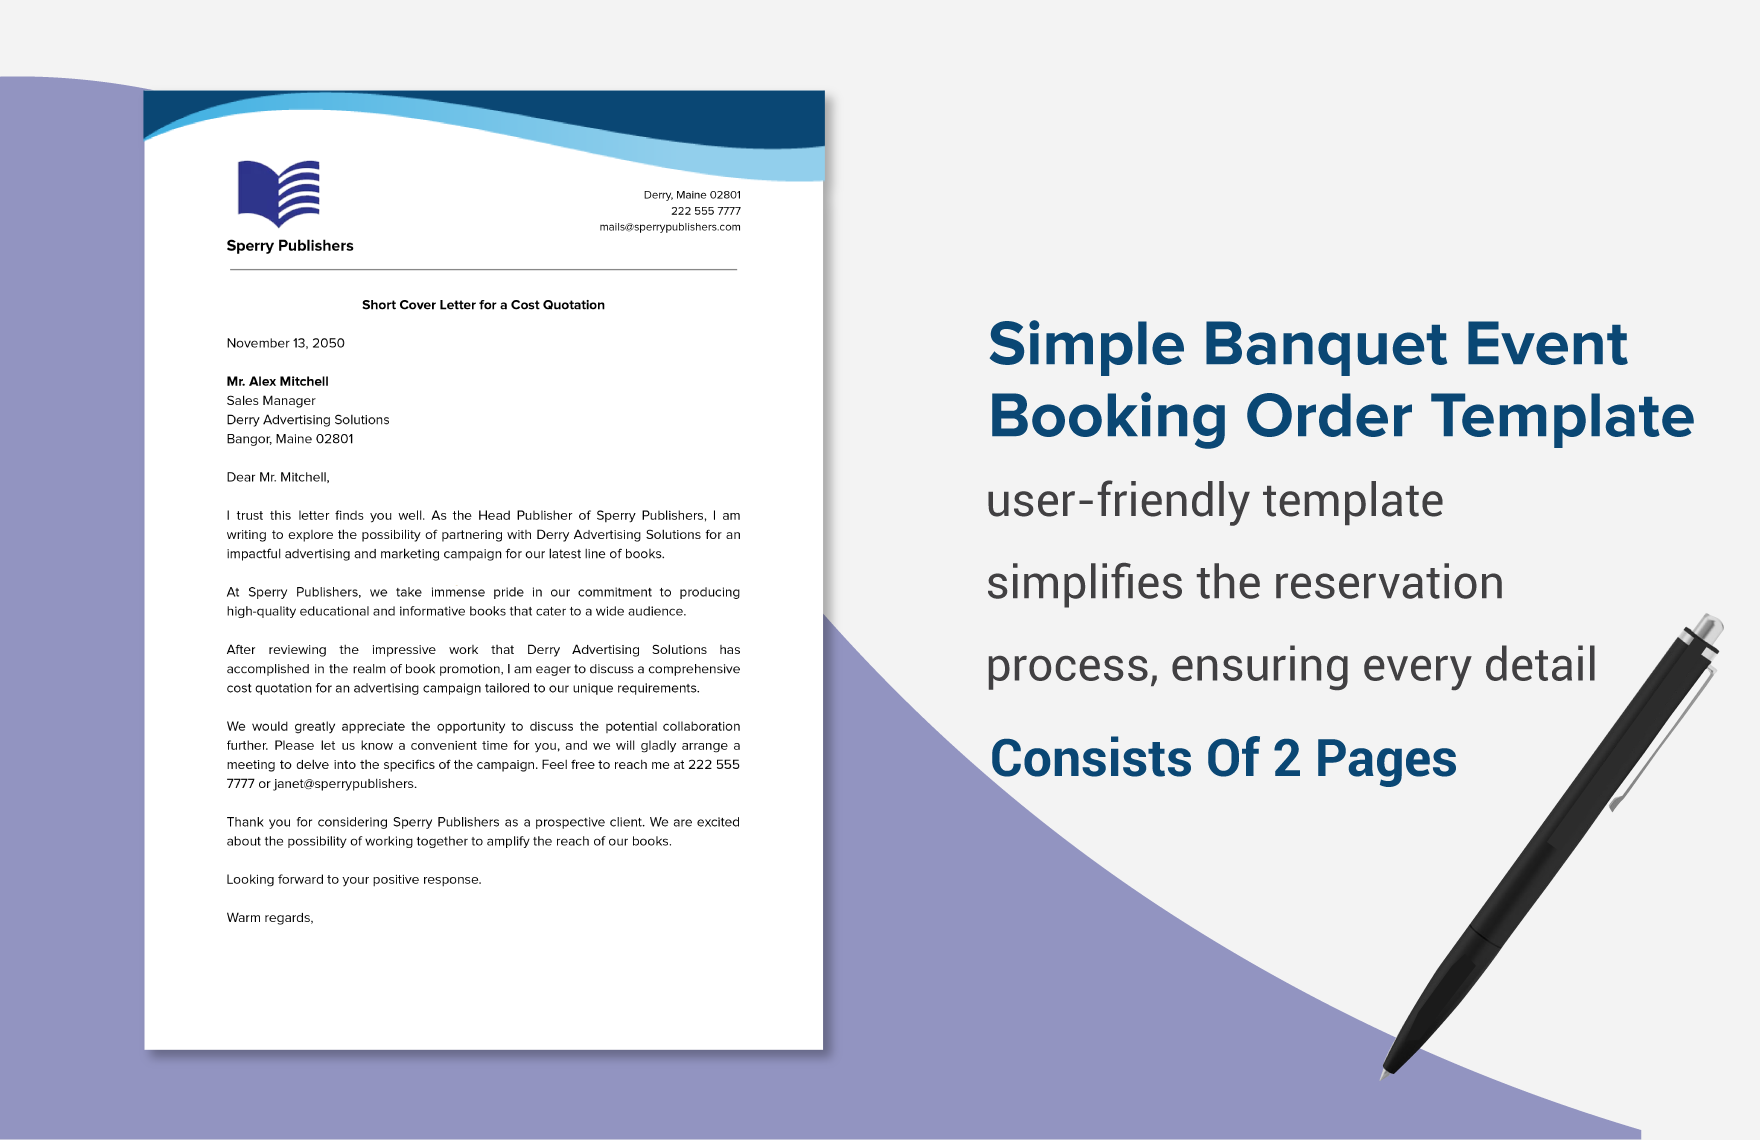 Simple Banquet Event Booking Order Template